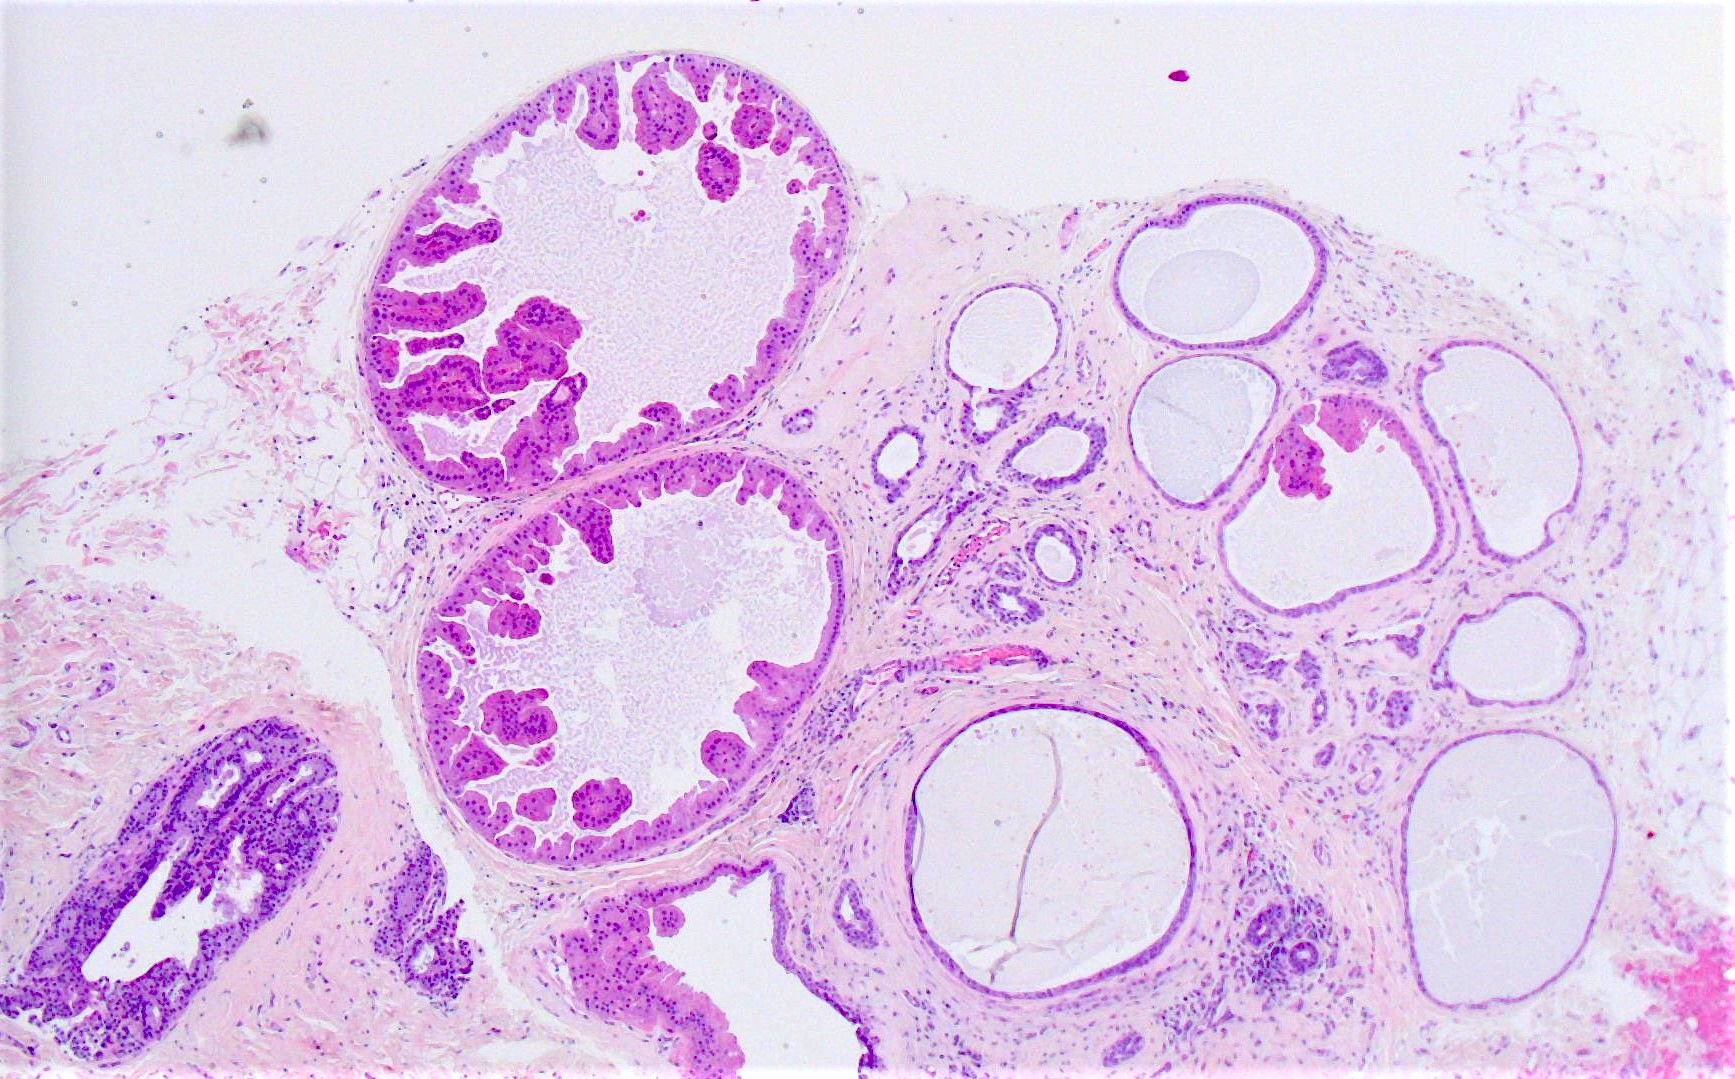 Papillary lesion with apocrine metaplasia Does hpv type 16 cause warts